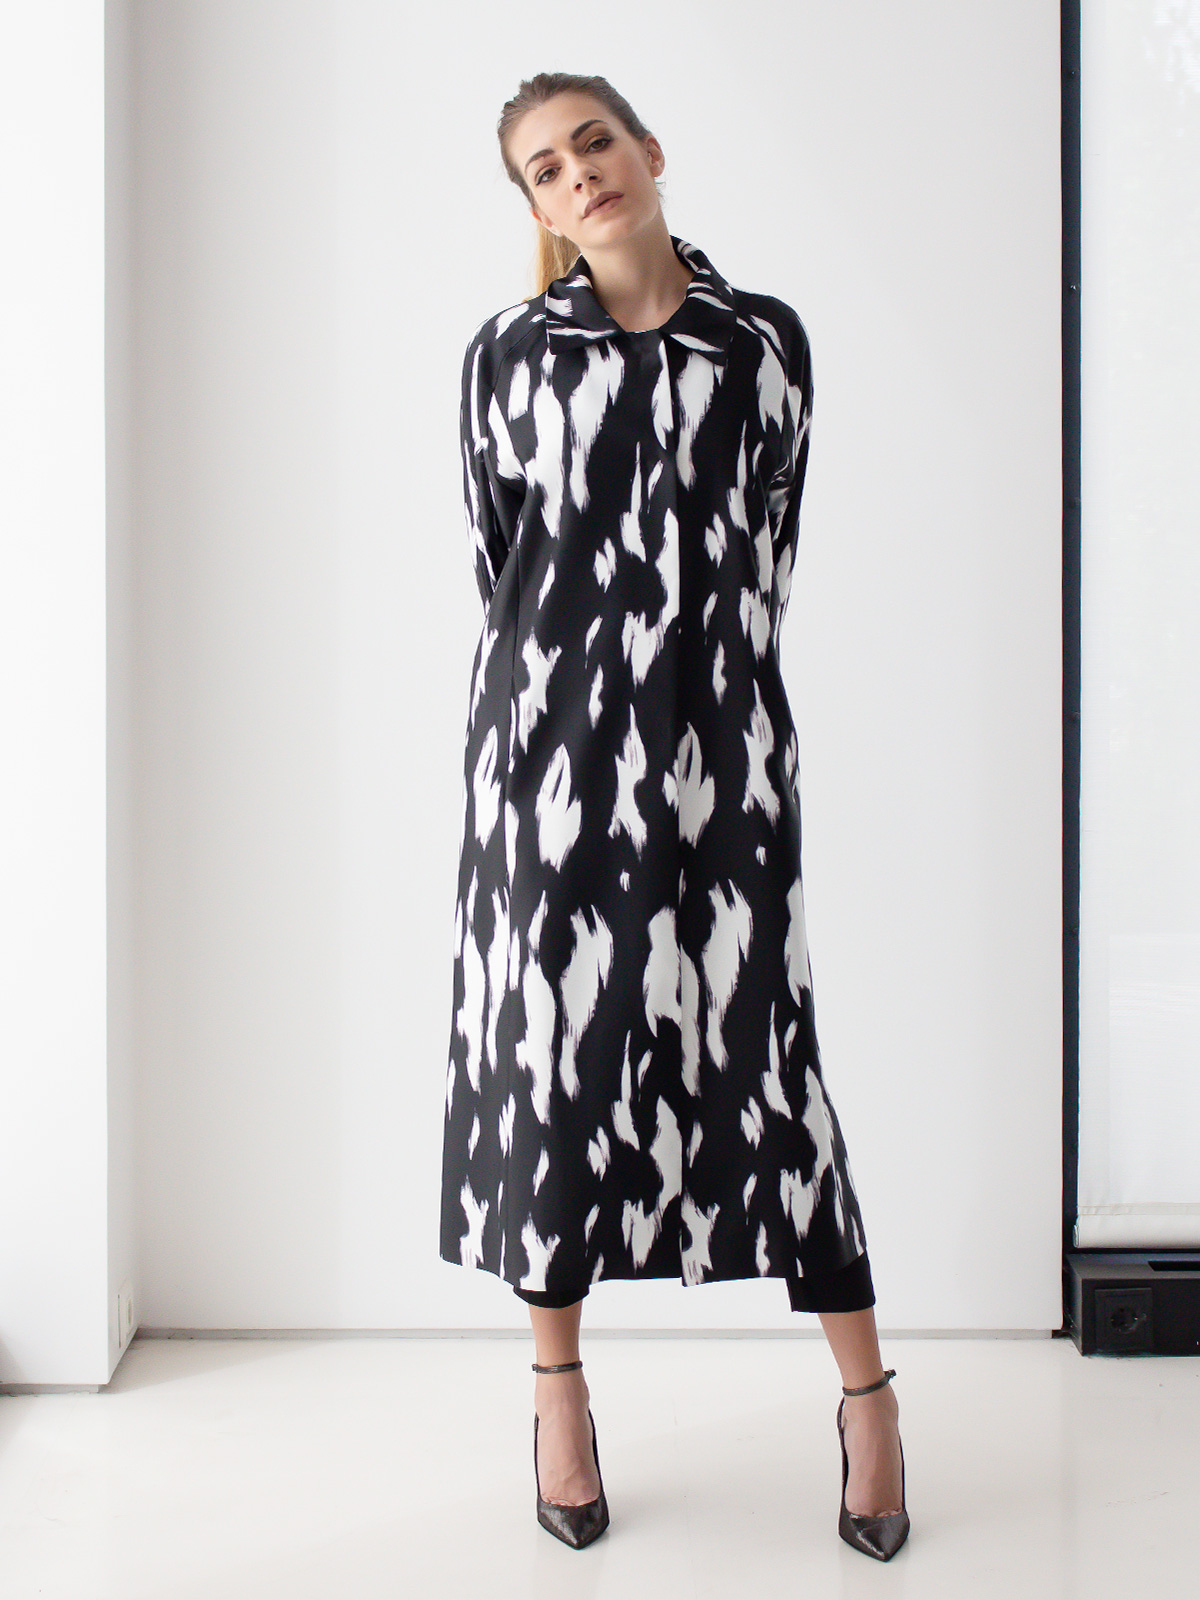 Sotris collection | Black and white coat